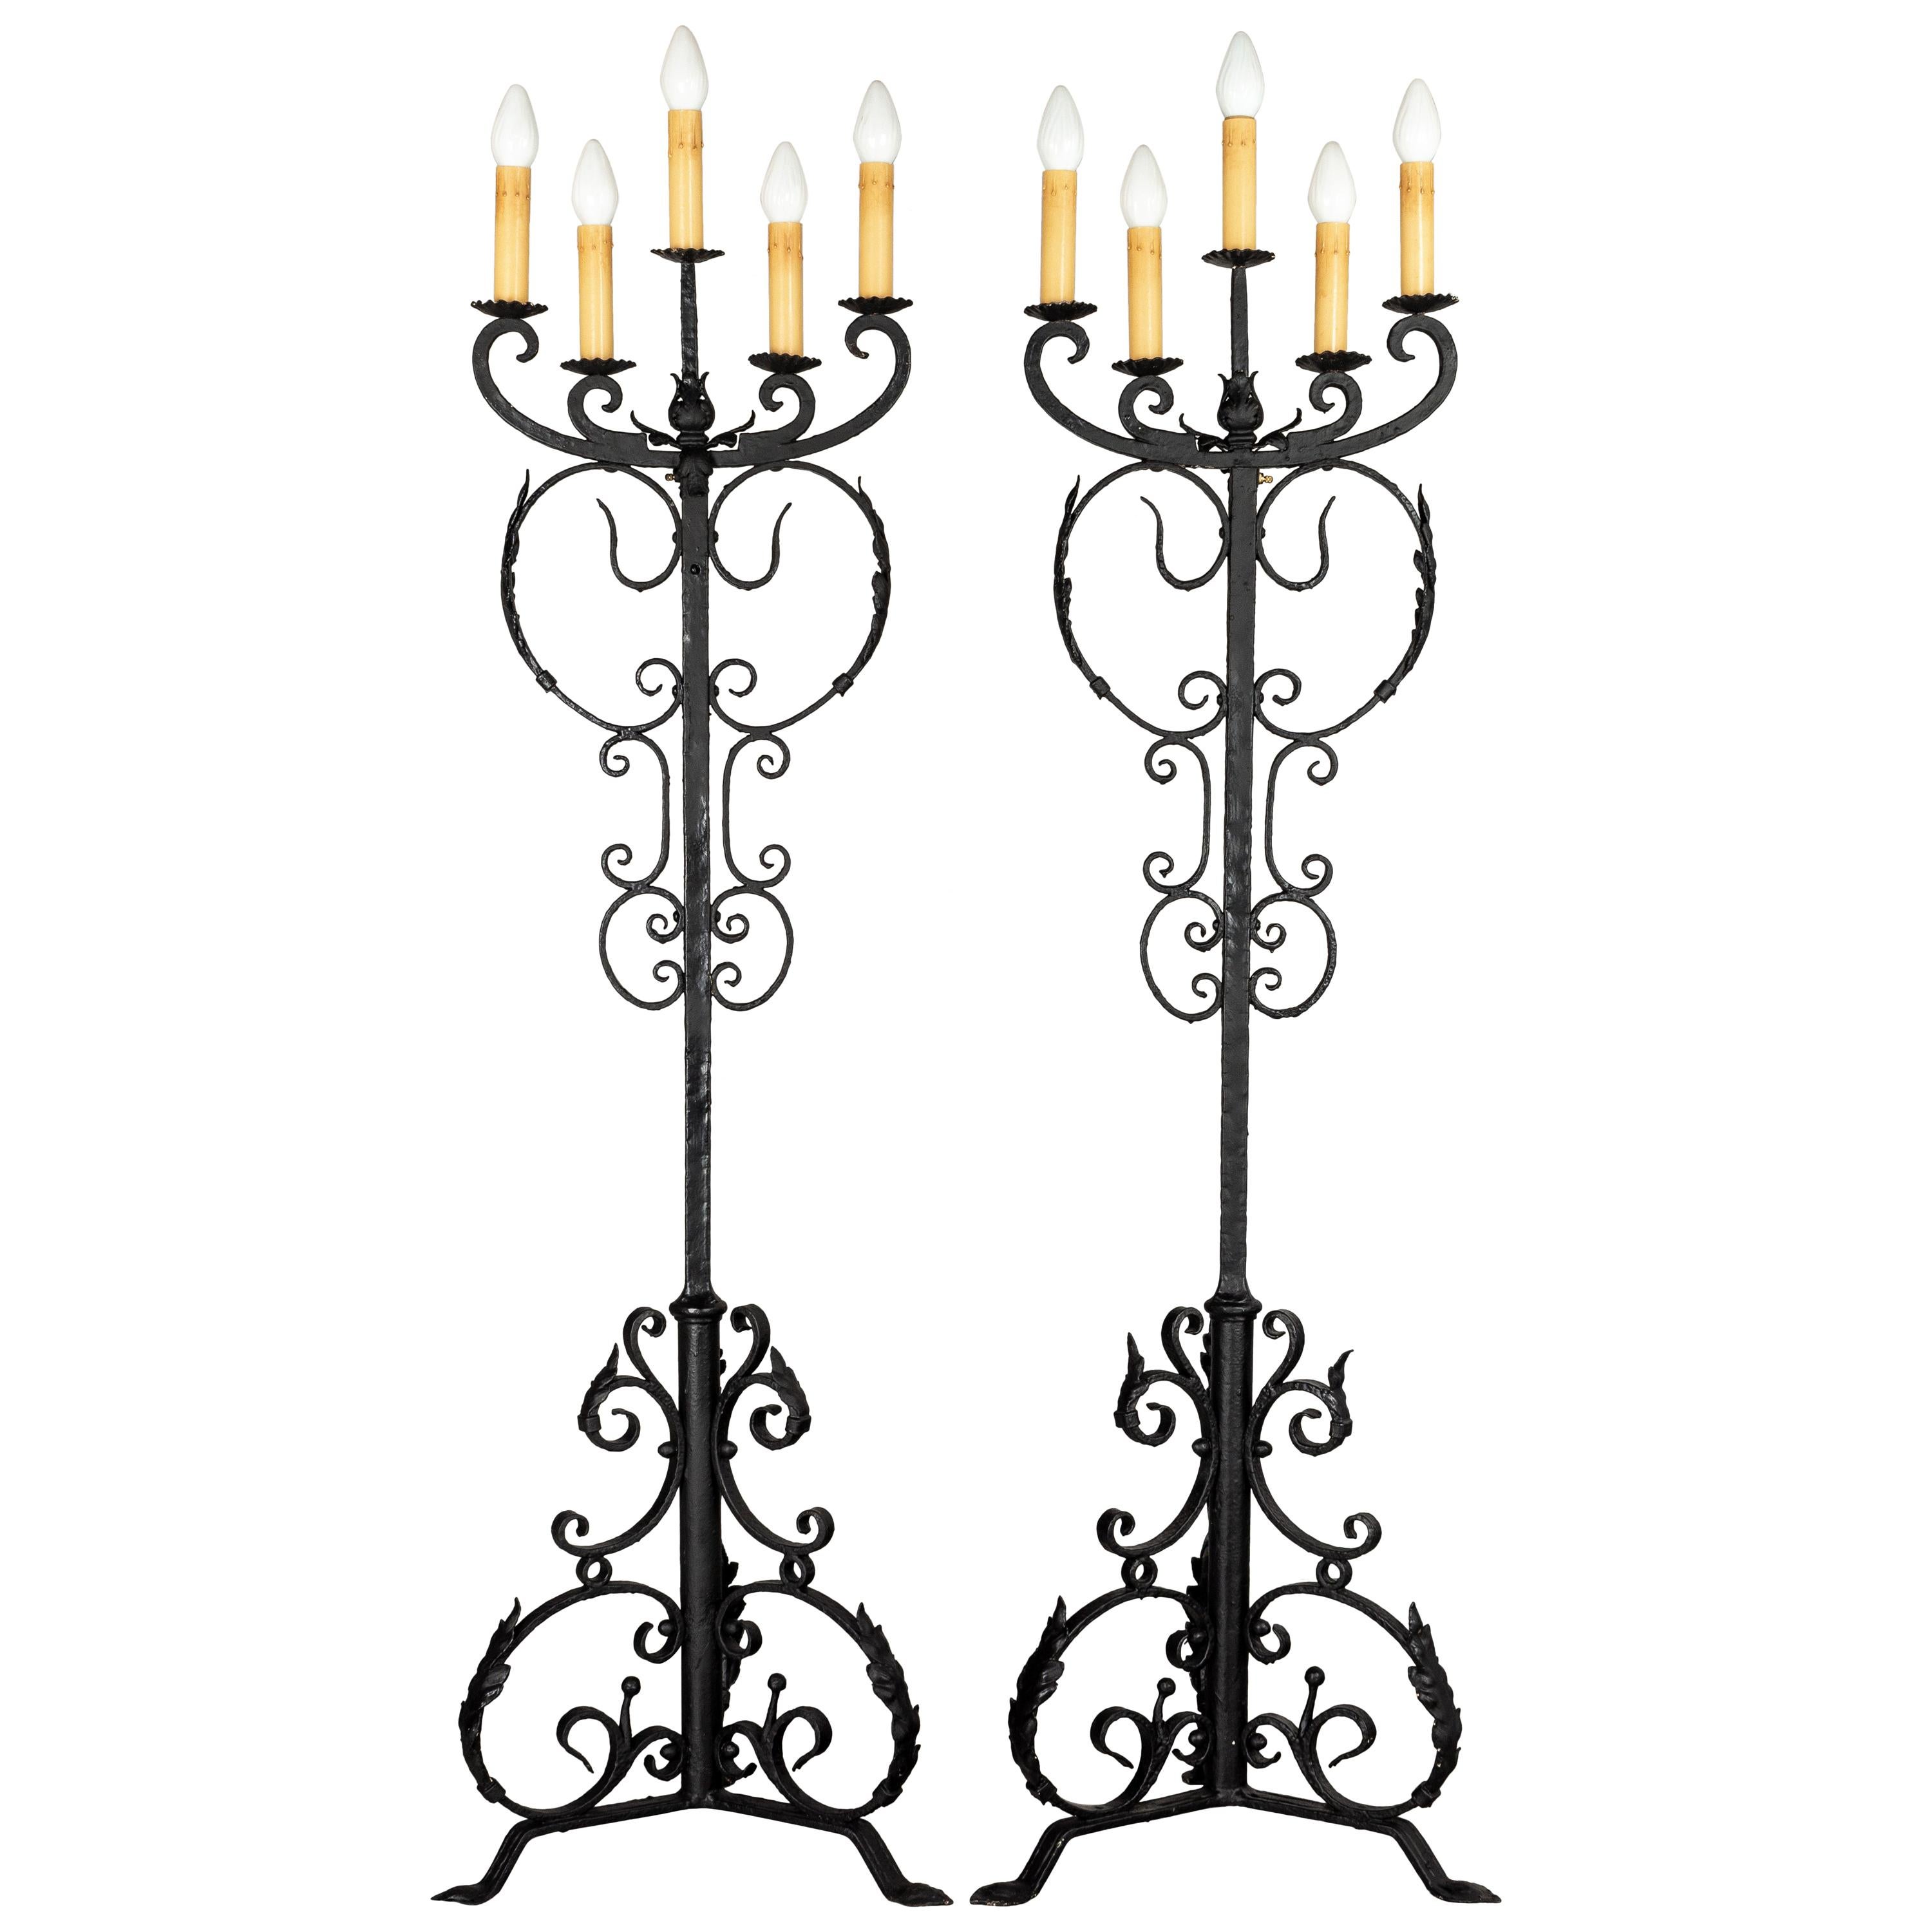 Pair of 1920s Spanish Revival Wrought Iron Floor Torchères